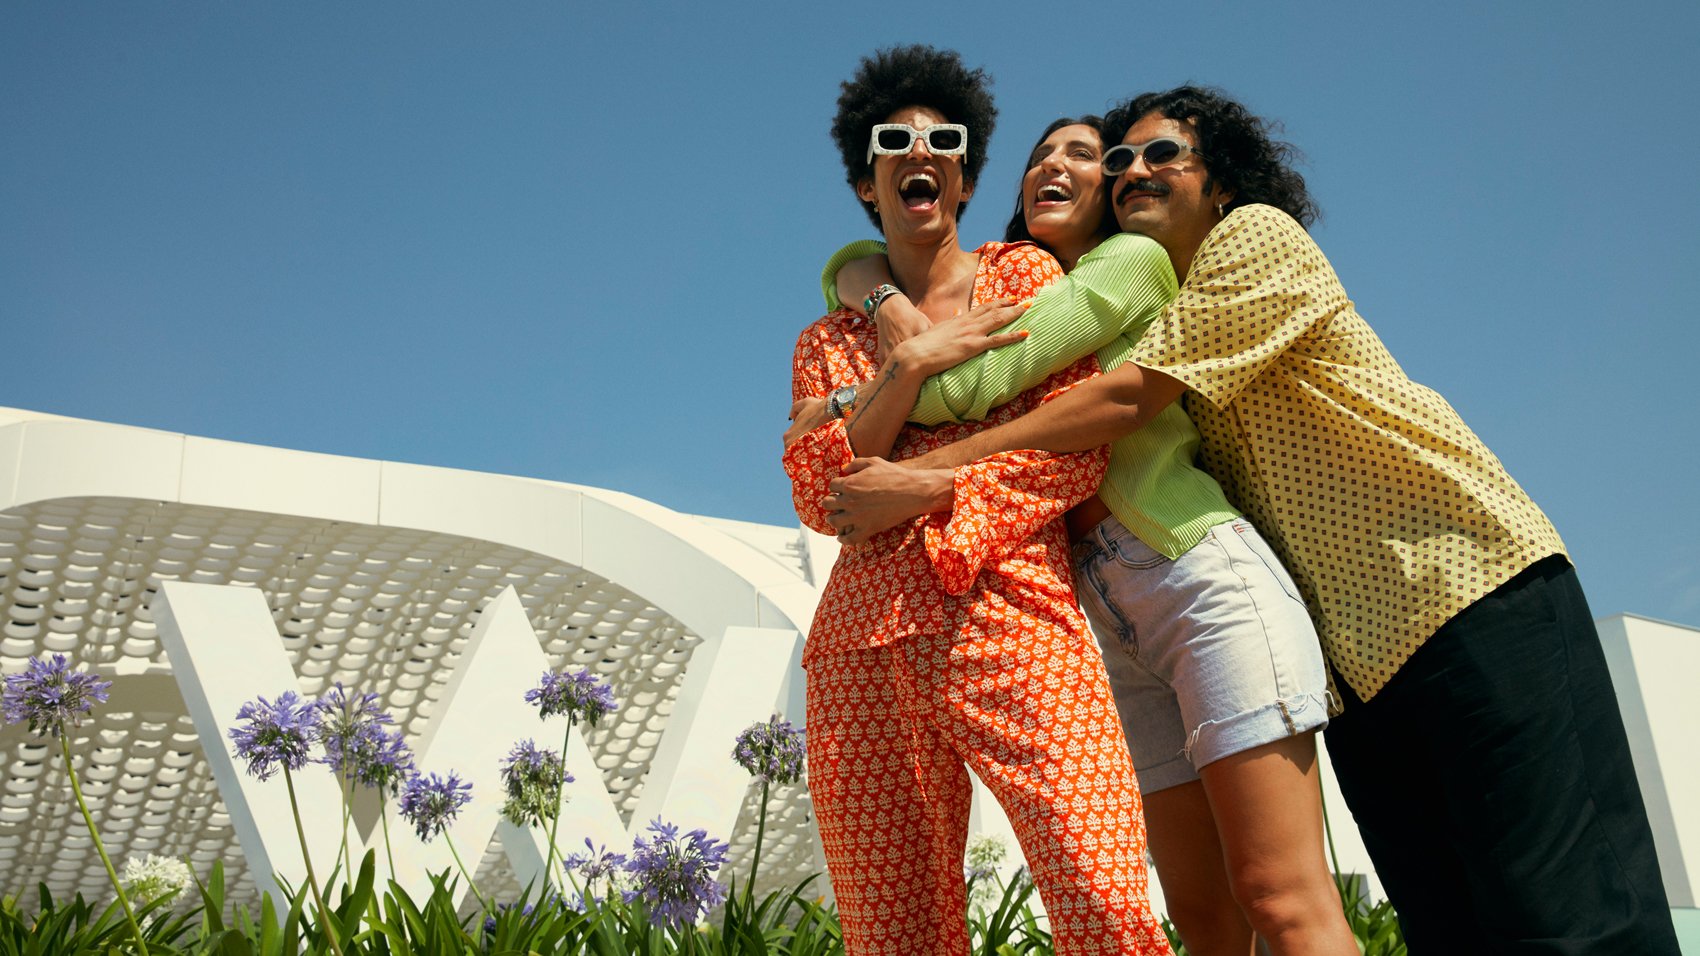 Friends hugging on an international W Hotels vacation in bright clothing with blue skies and happy, smiling faces in front of the hotel sculptural logo